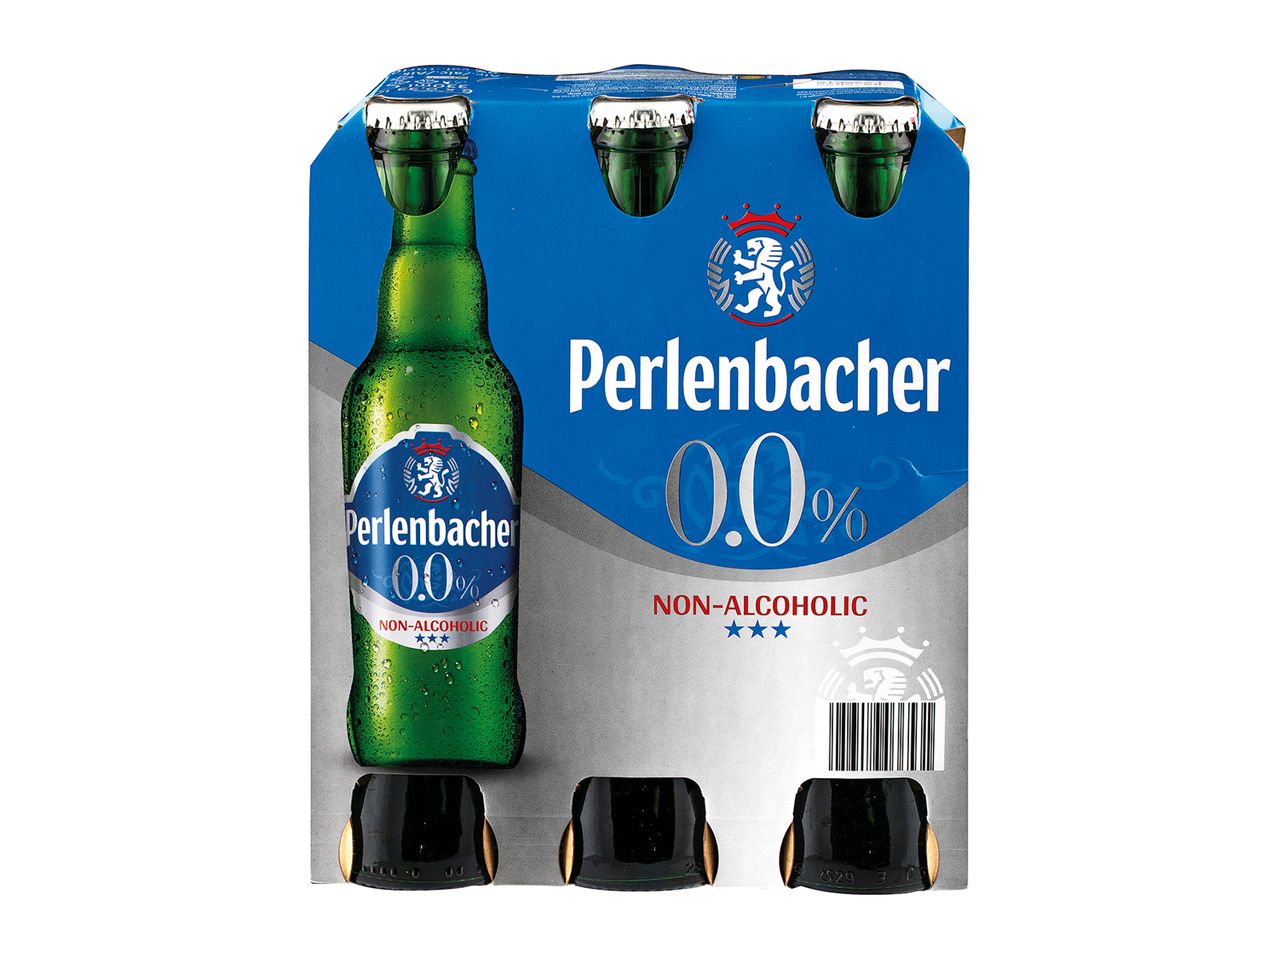 Go to full screen view: Perlenbacher Pils Alcohol Free - Image 1